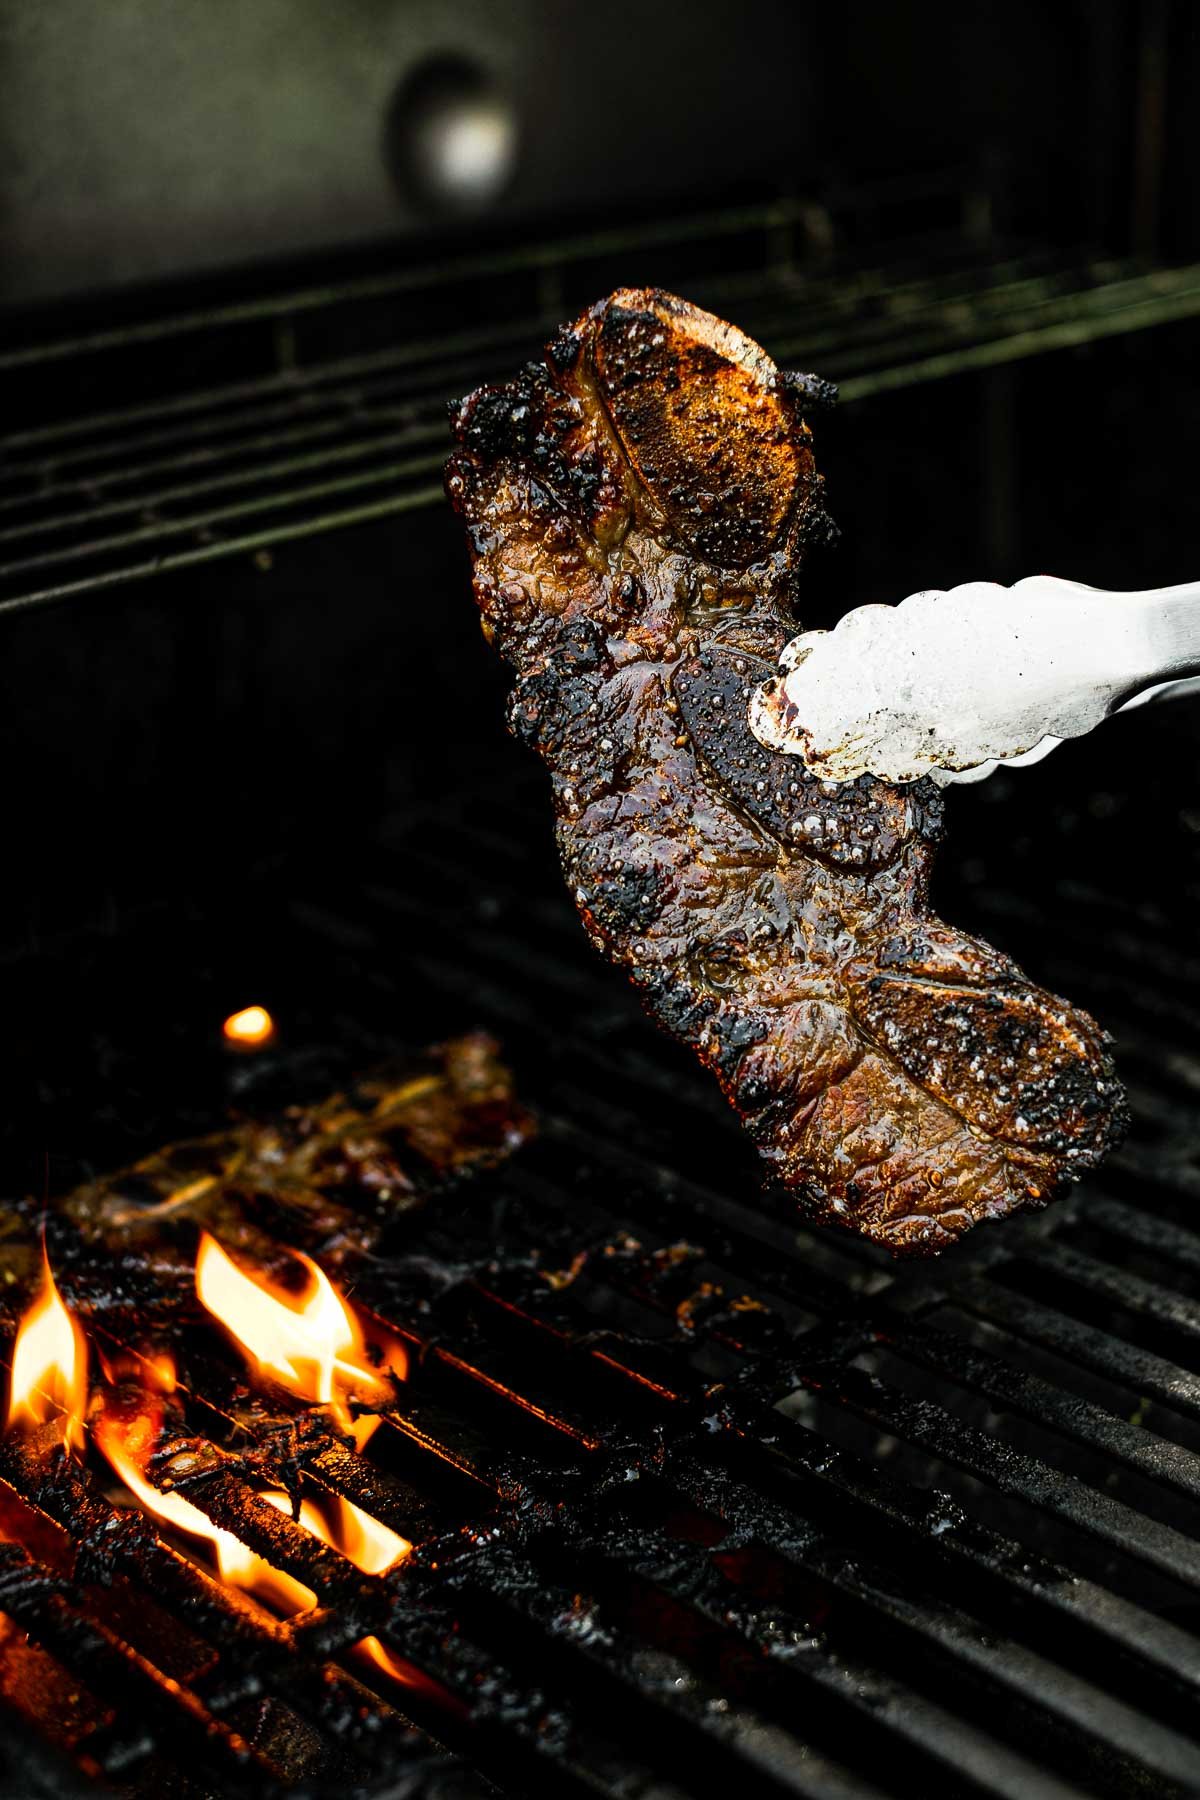 Grill tongs holding grilled Korean short ribs over grill grates. The kalbi is charred & caramelized.